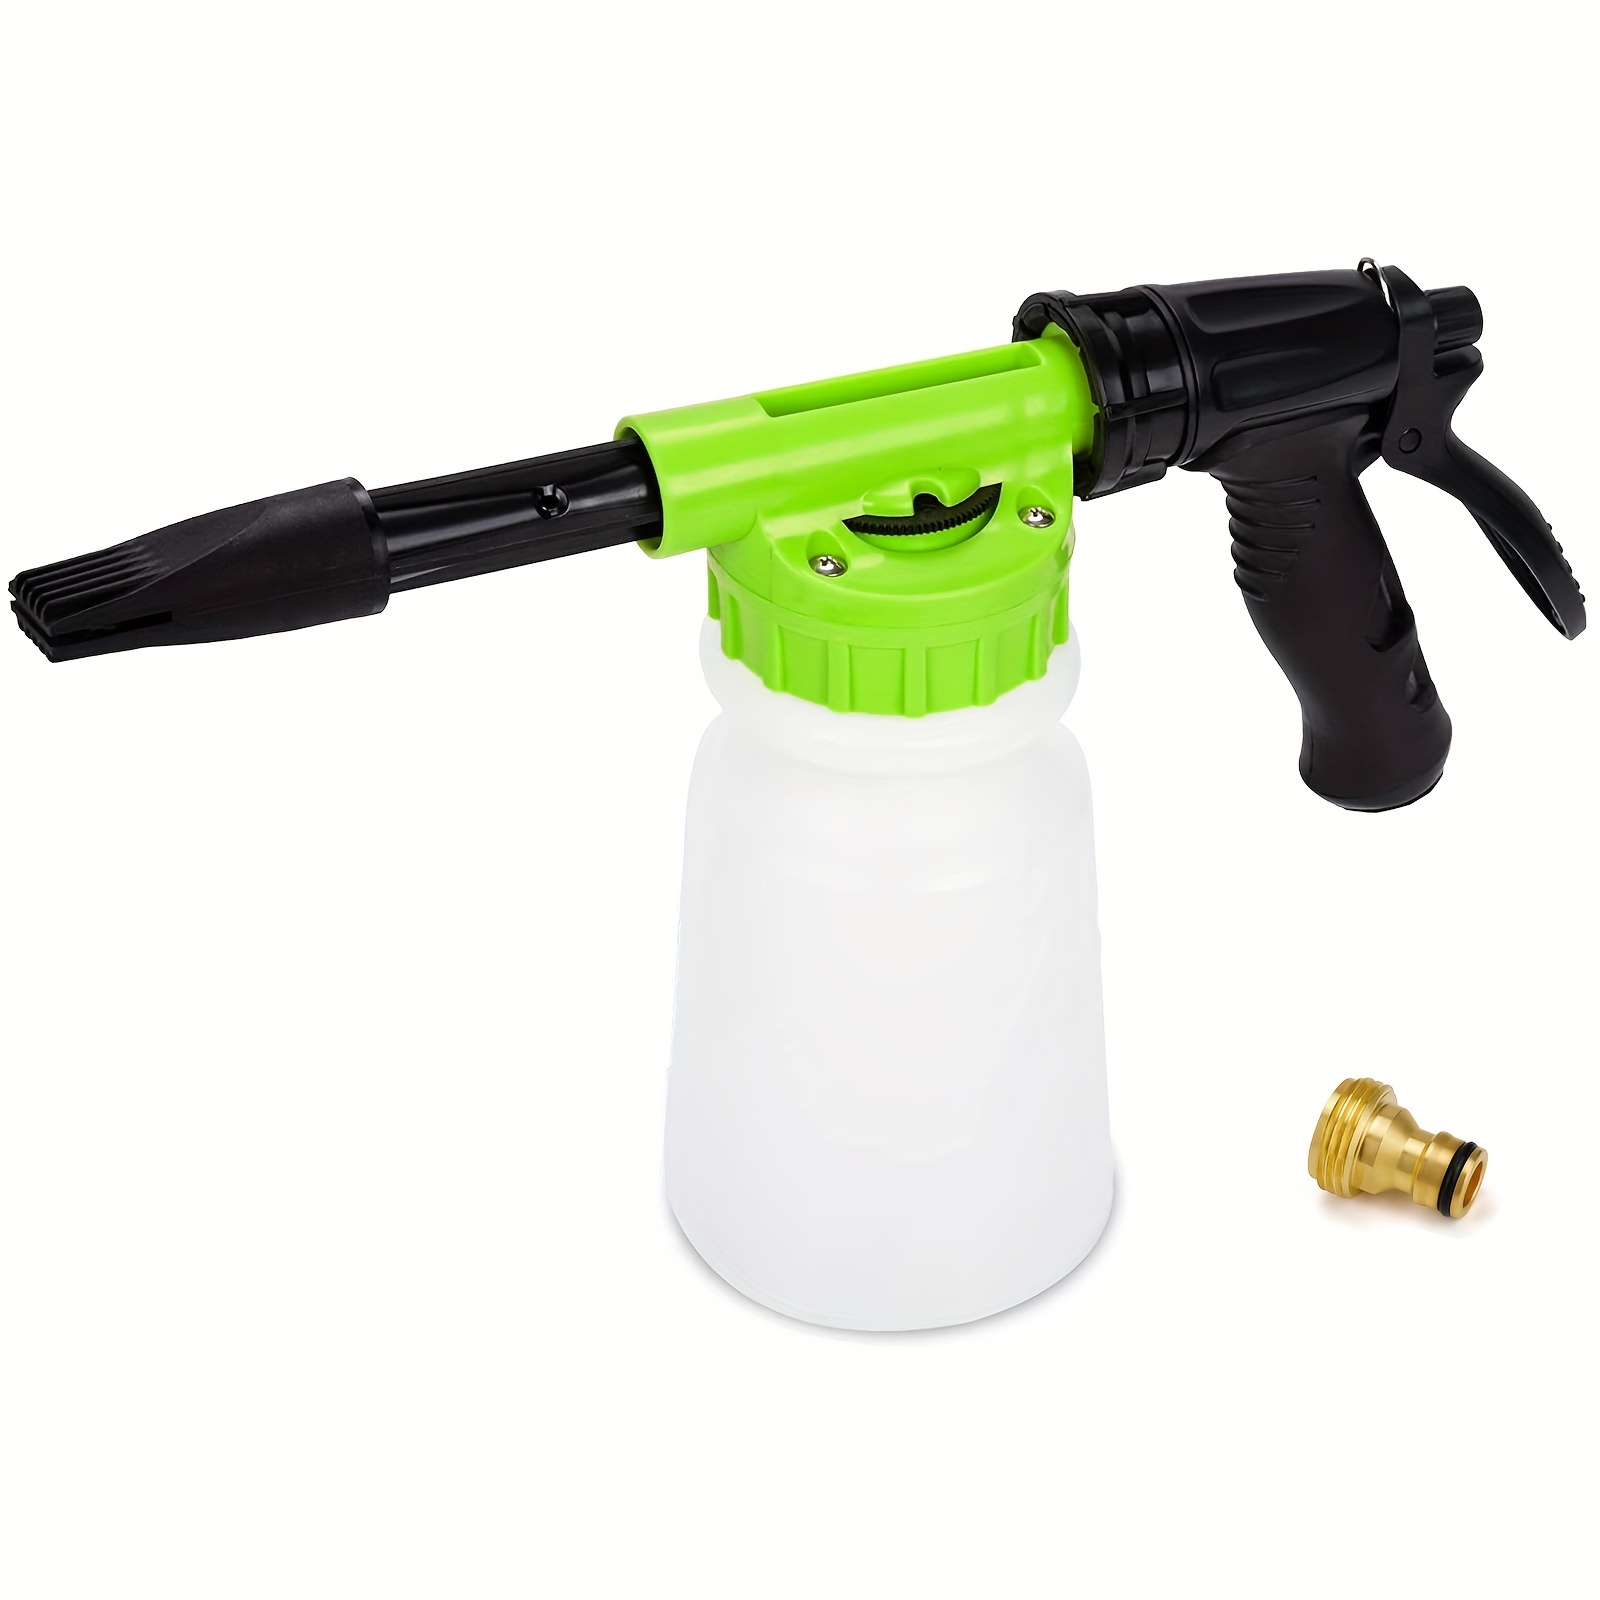 Car Wash Foam Gun/Hose Sprayer, 16 IN 1 Cannon, Adjustable with 2.5-6 Ratio  Dial Foam Blaster, 1L Bottle, Nozzles, Mitten, 1/2” Quick Connector for